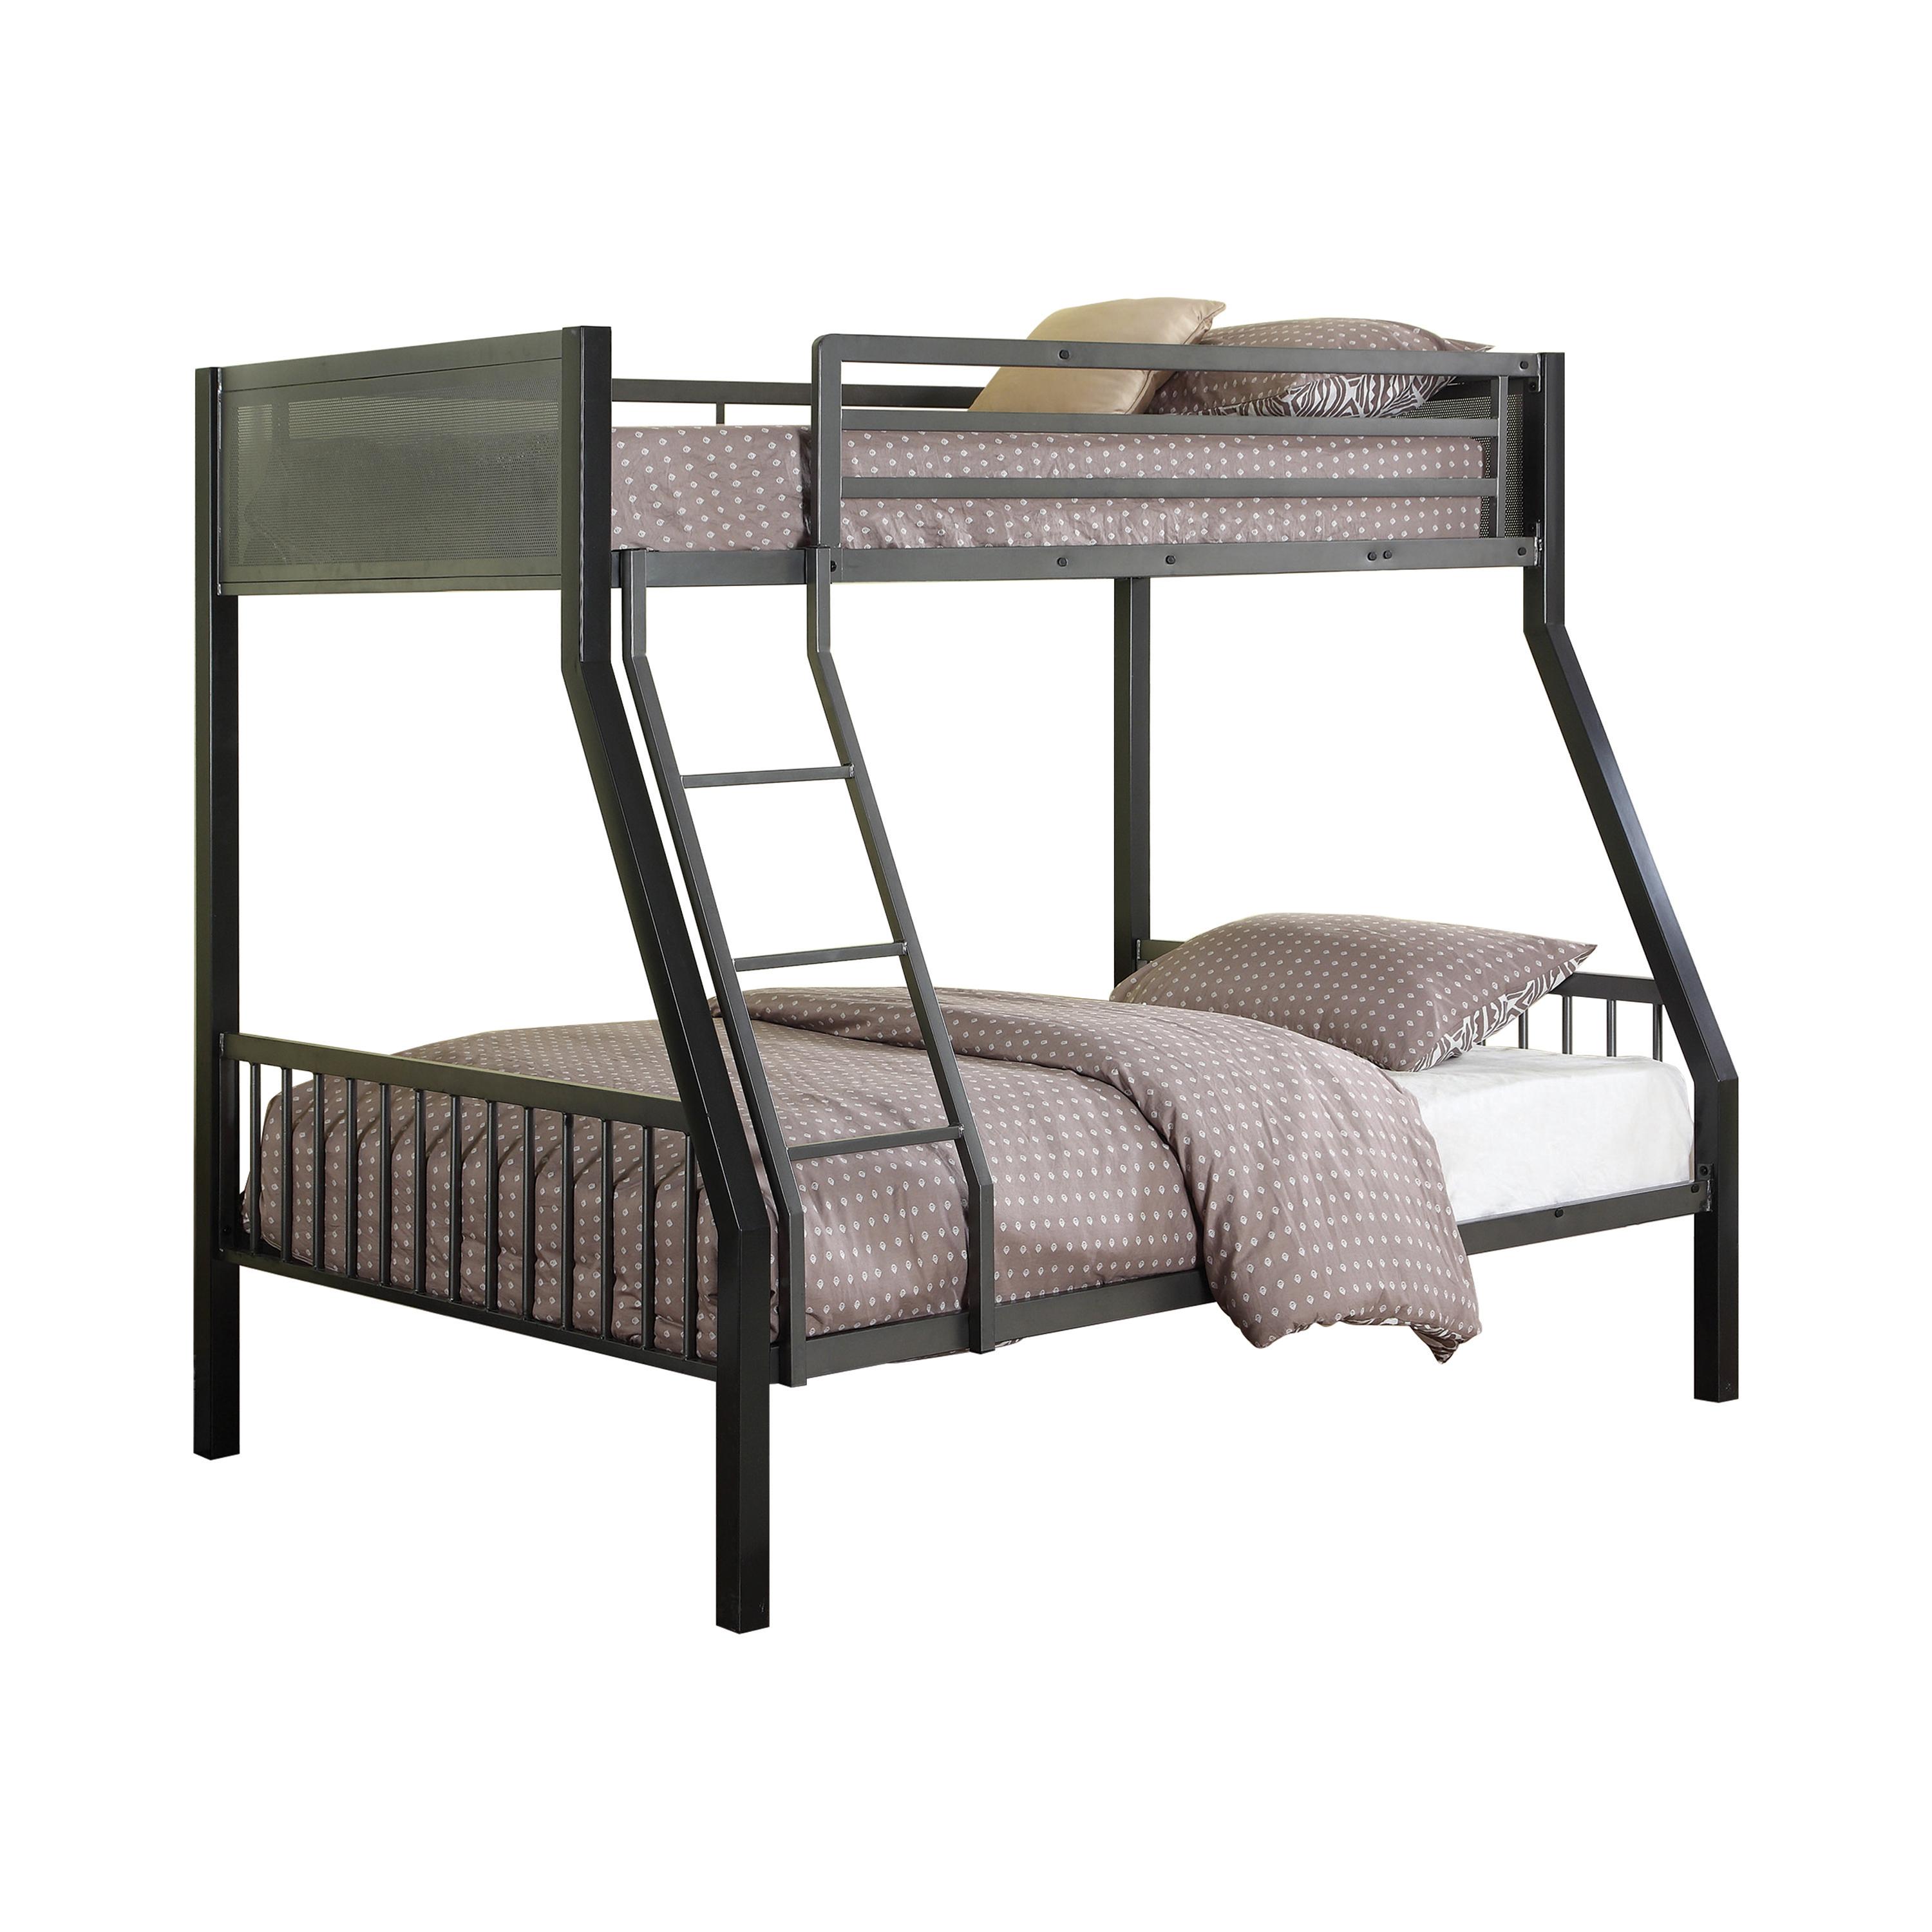 Transitional Bunk Bed 460391 Meyers 460391 in Black 